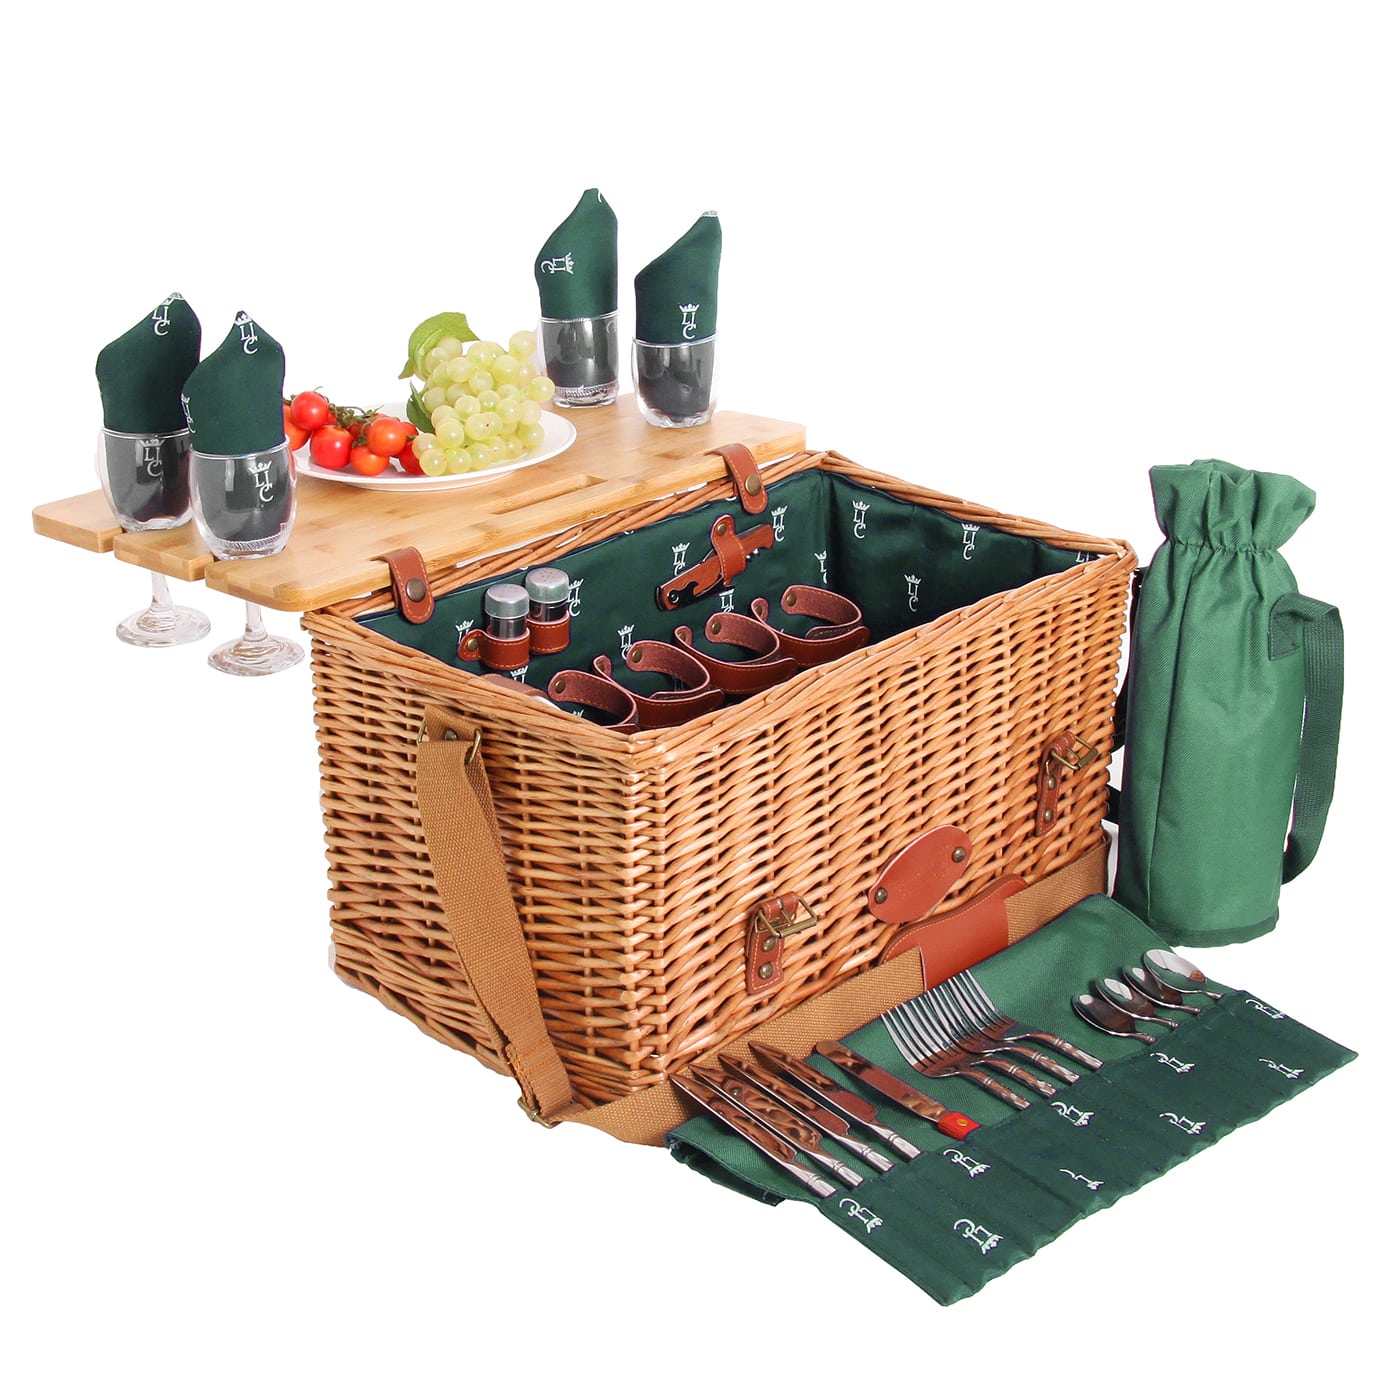 Leather picnic basket with table Saint-Honoré green - 4 person